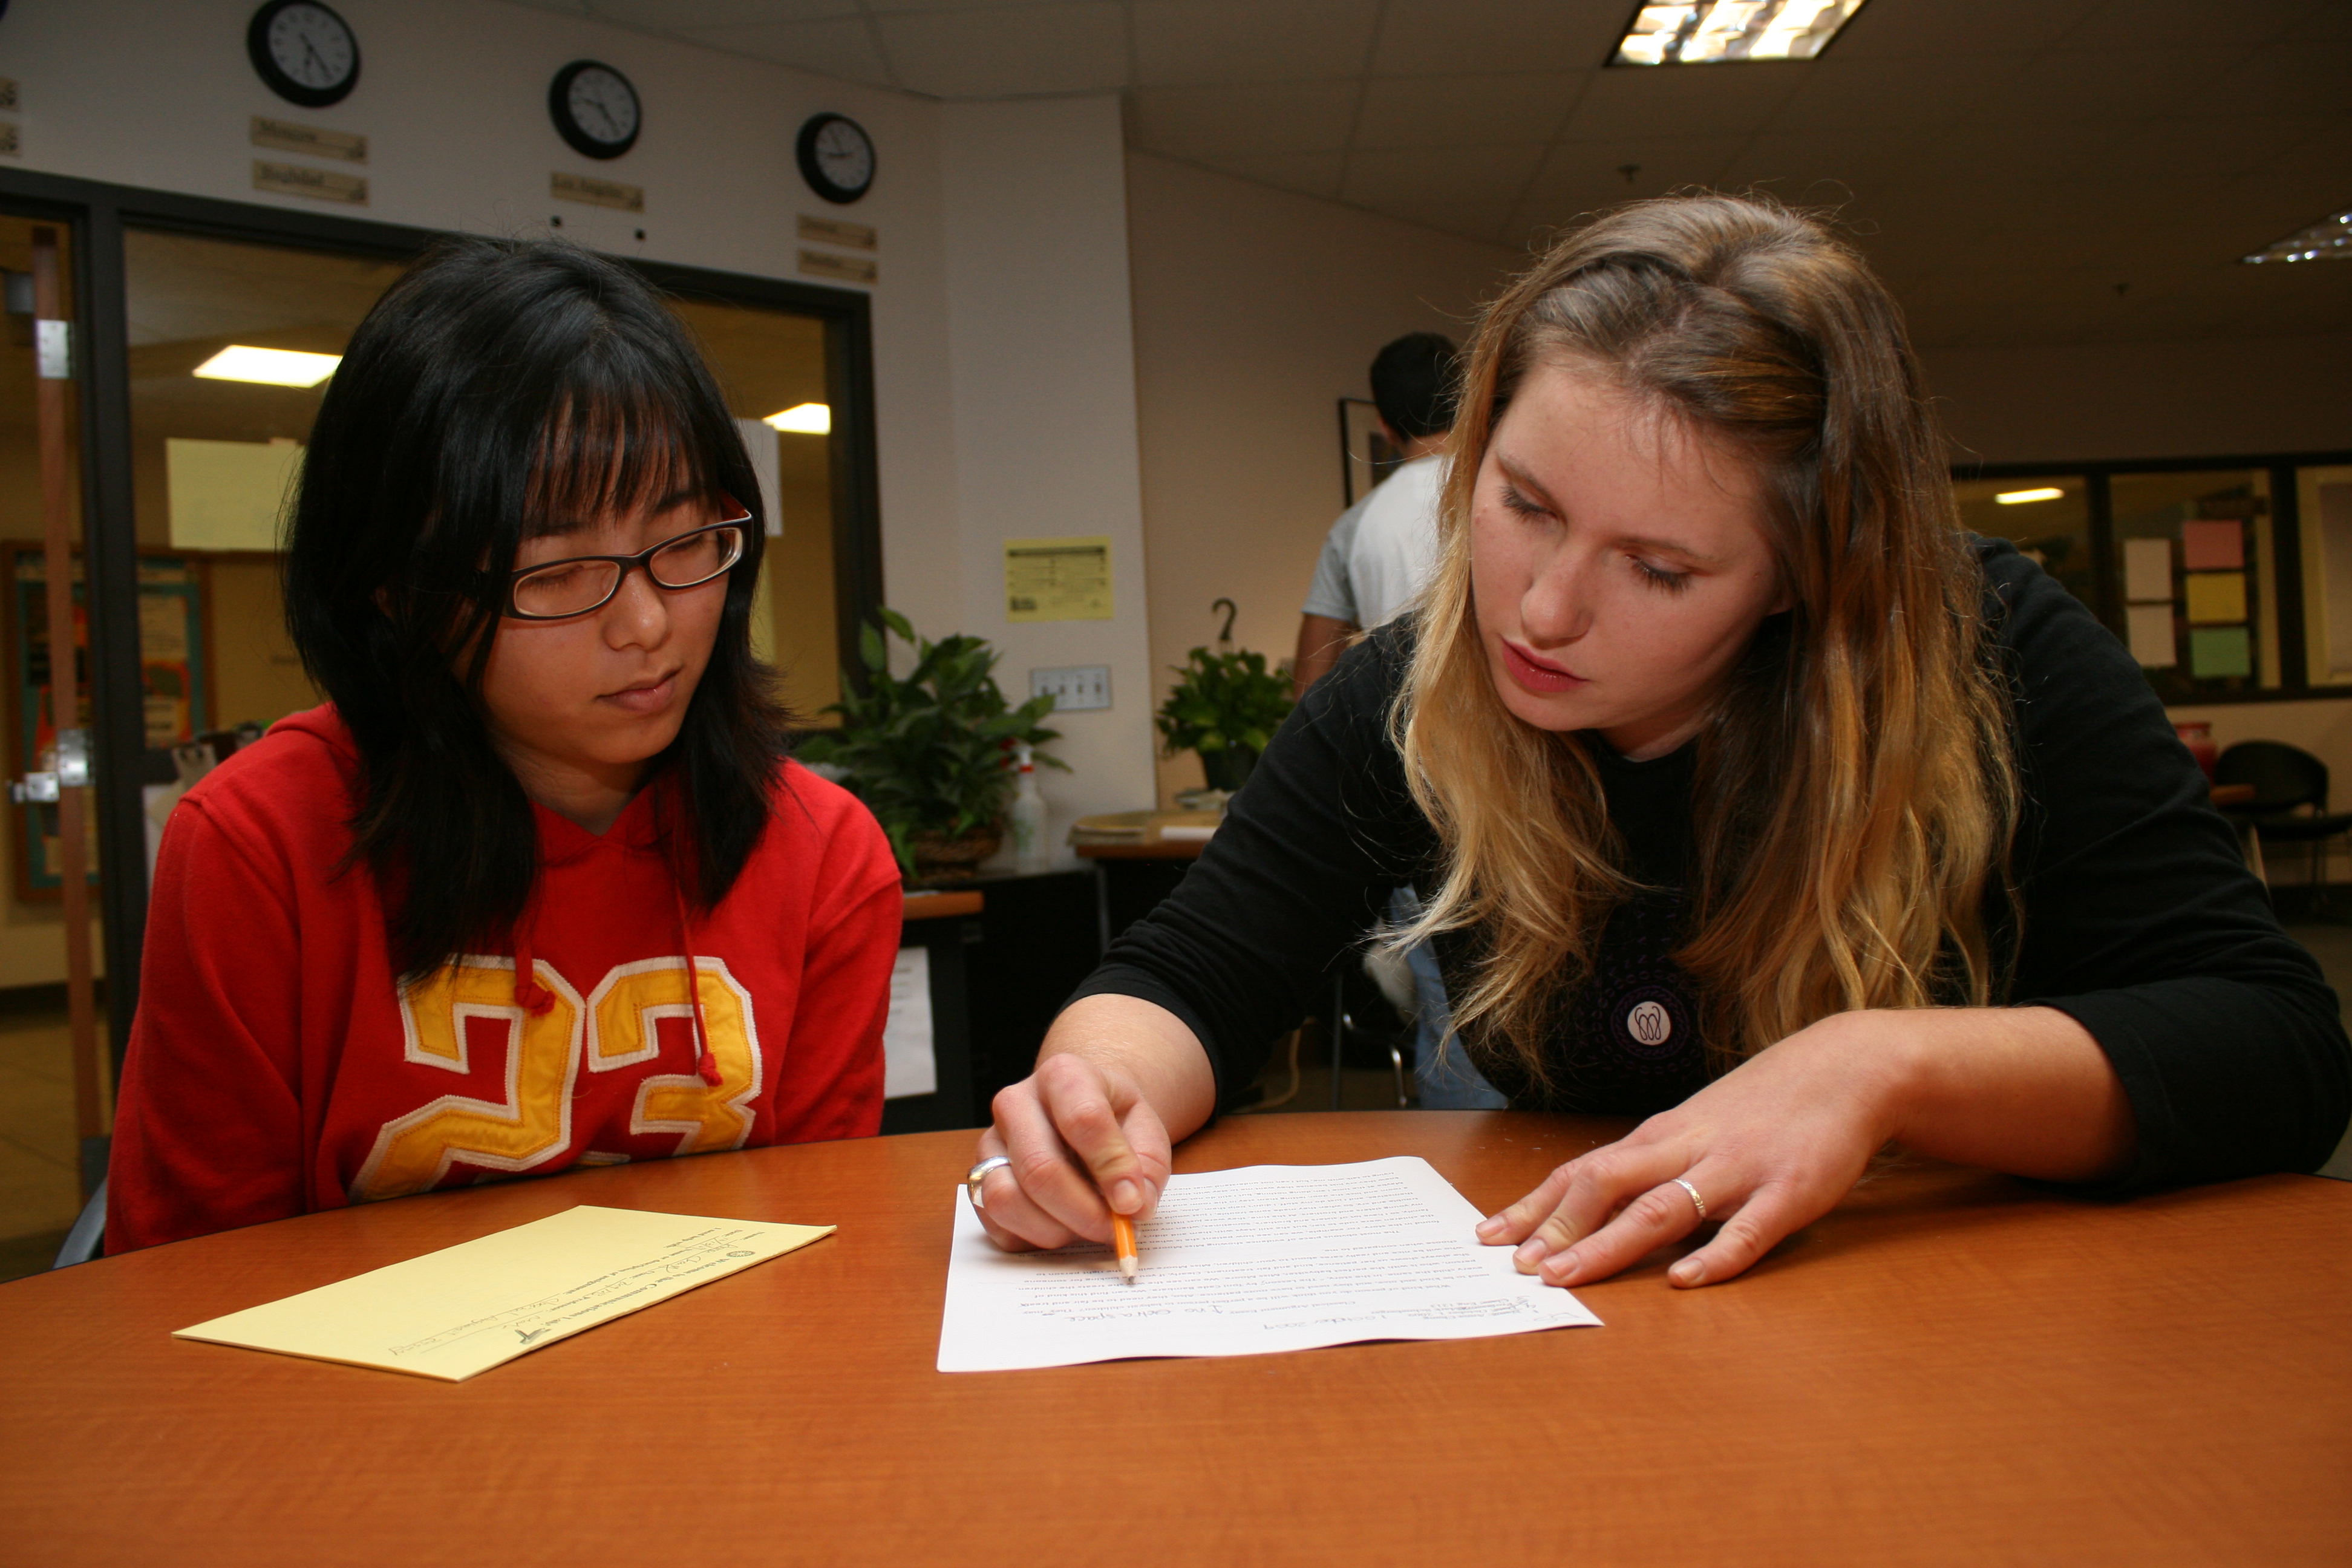 Female student getting support from a staff member.